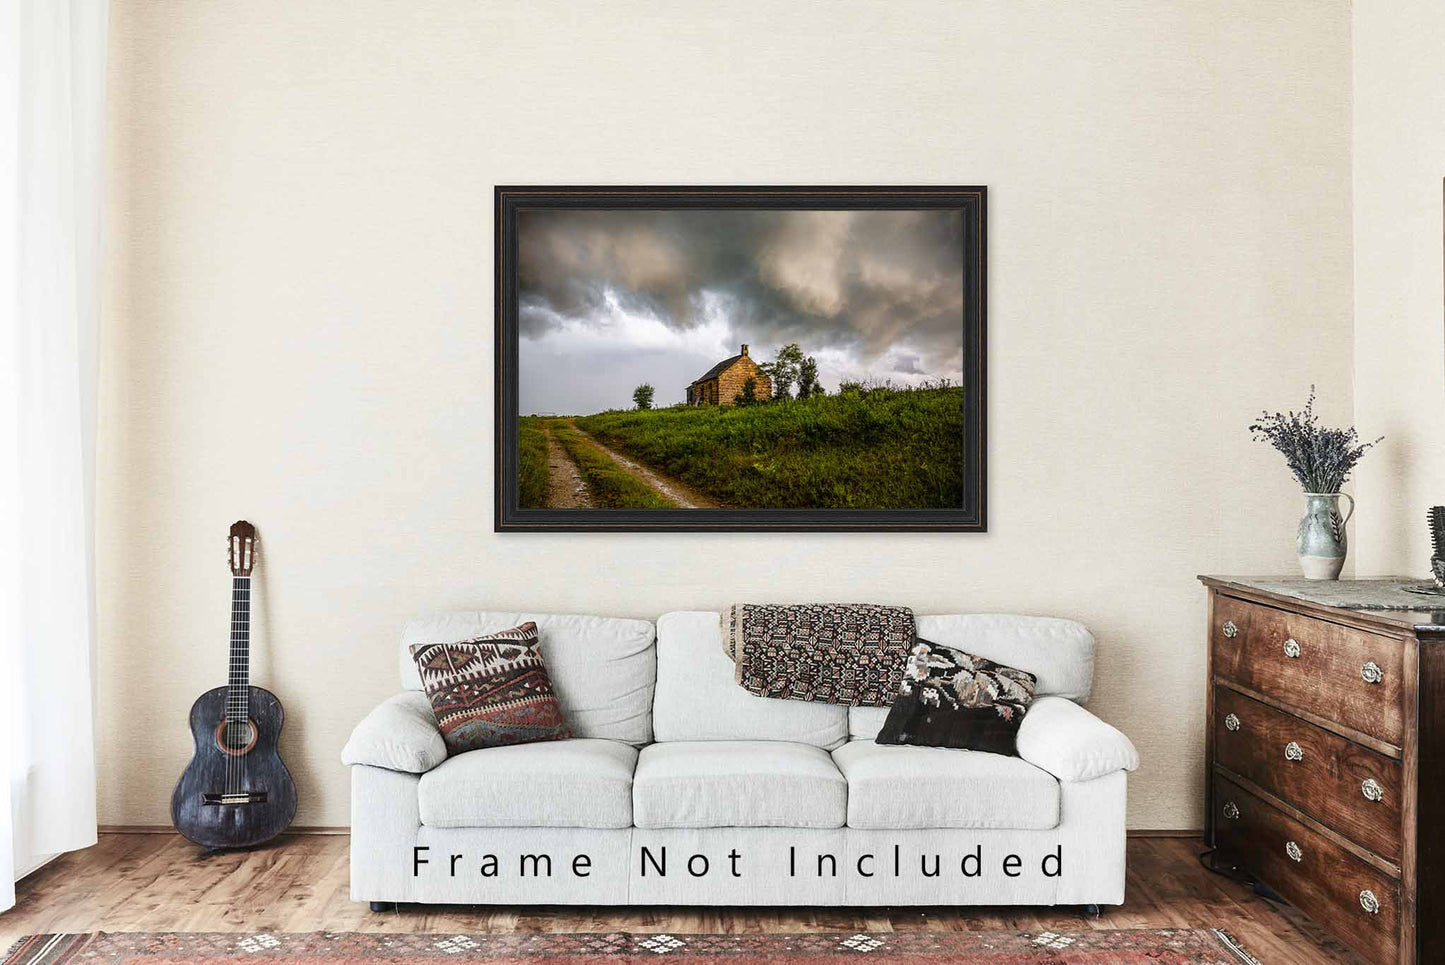 Farmhouse Decor - Photo Print of Abandoned Homestead Under Storm Clouds on Summer Day in Oklahoma - Rustic Country Photography Artwork